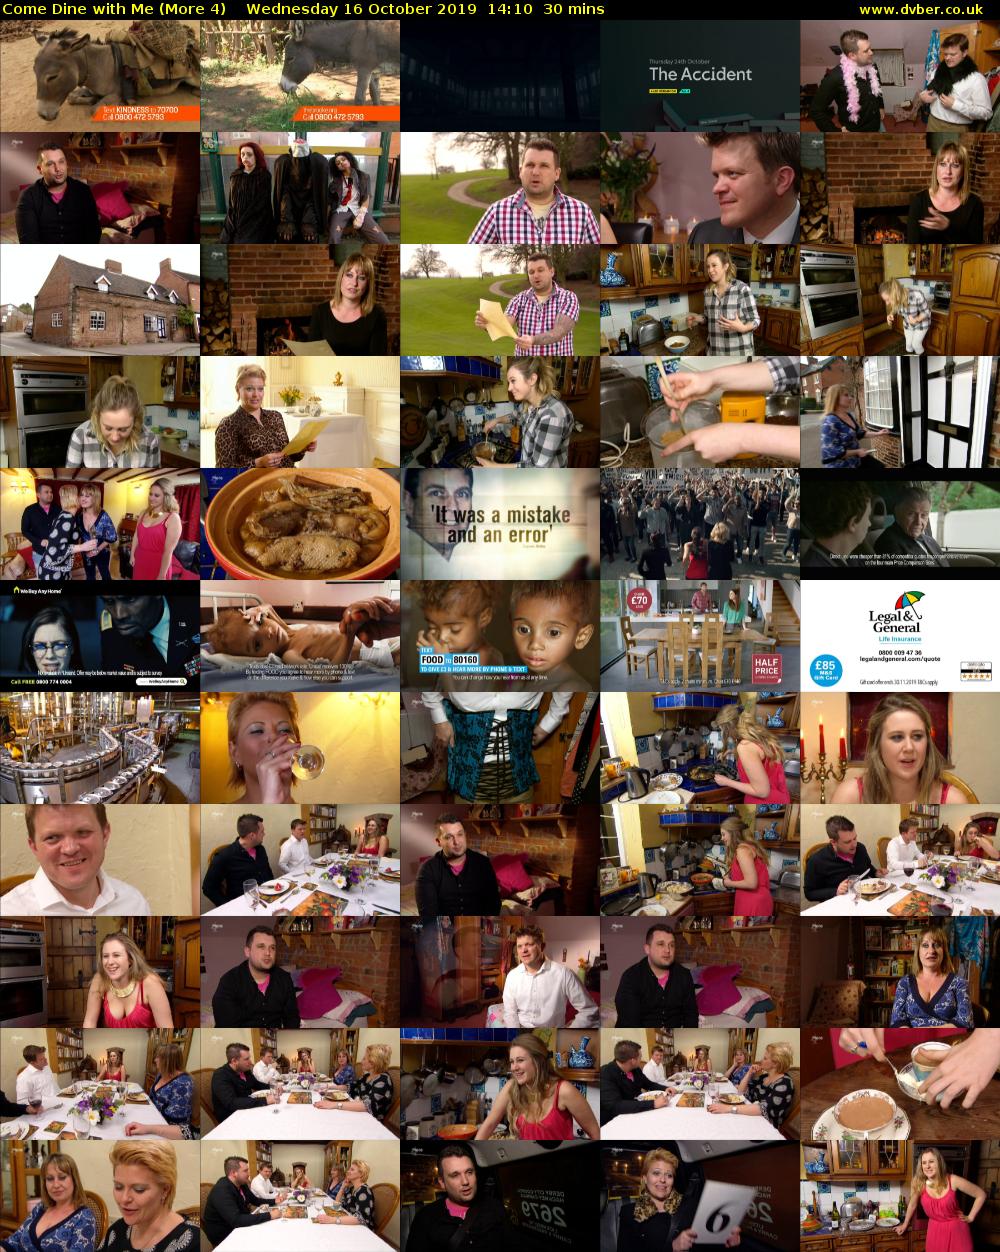 Come Dine with Me (More 4) Wednesday 16 October 2019 14:10 - 14:40